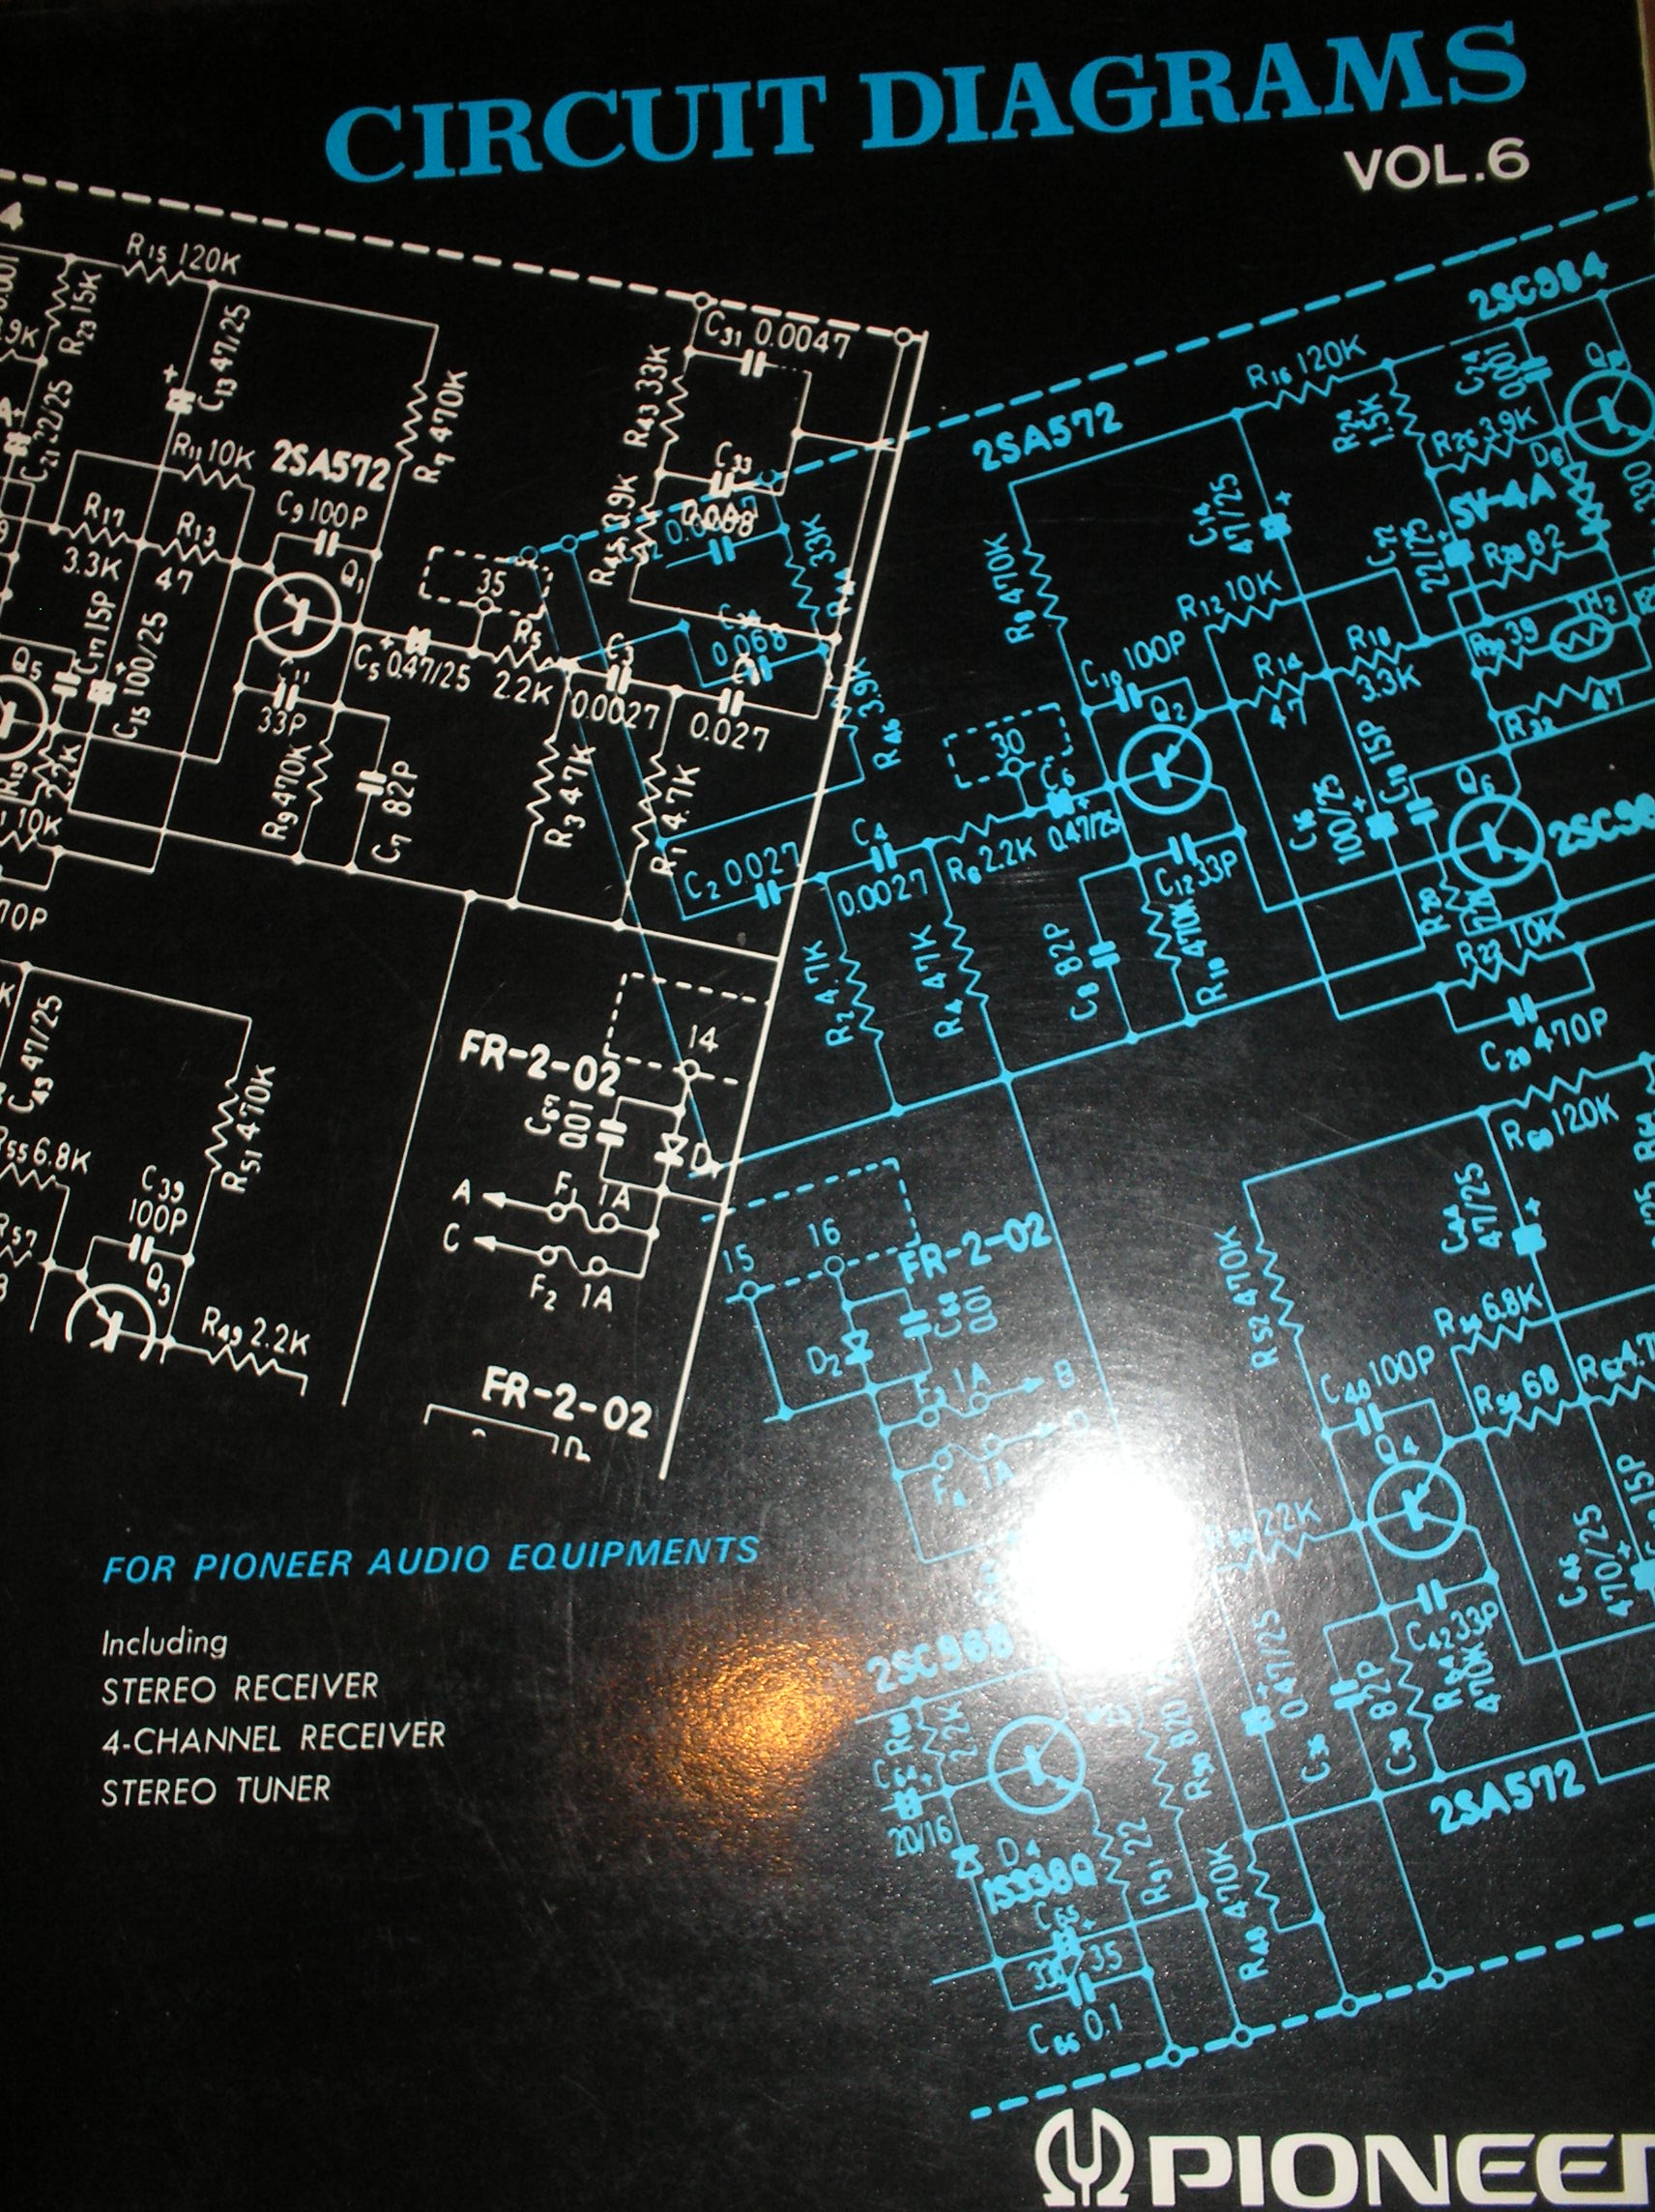 TX-6200 Stereo Tuner fold out schematics.   Book 6